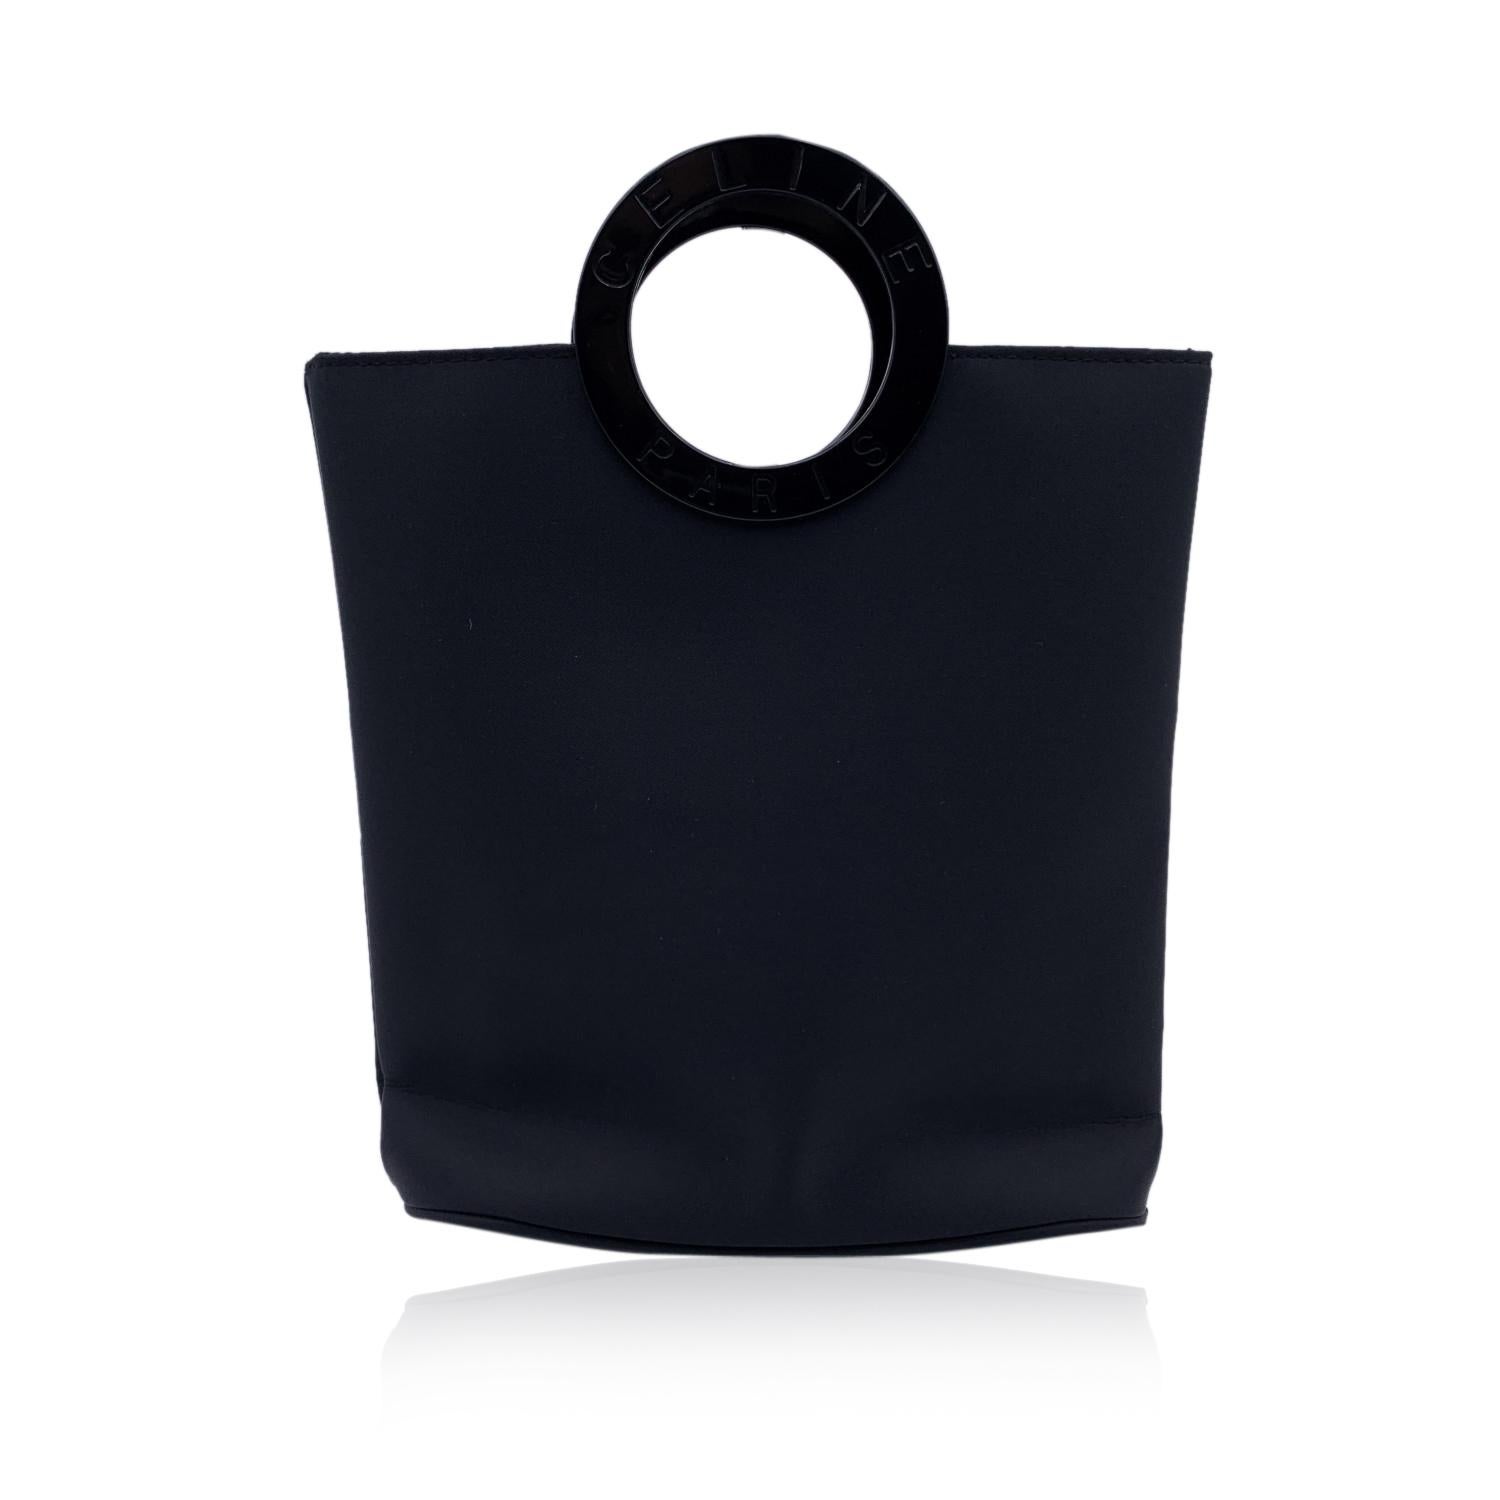 Celine Black Satin Small Tote Handbag Evening Bag Round Handles In Excellent Condition In Rome, Rome